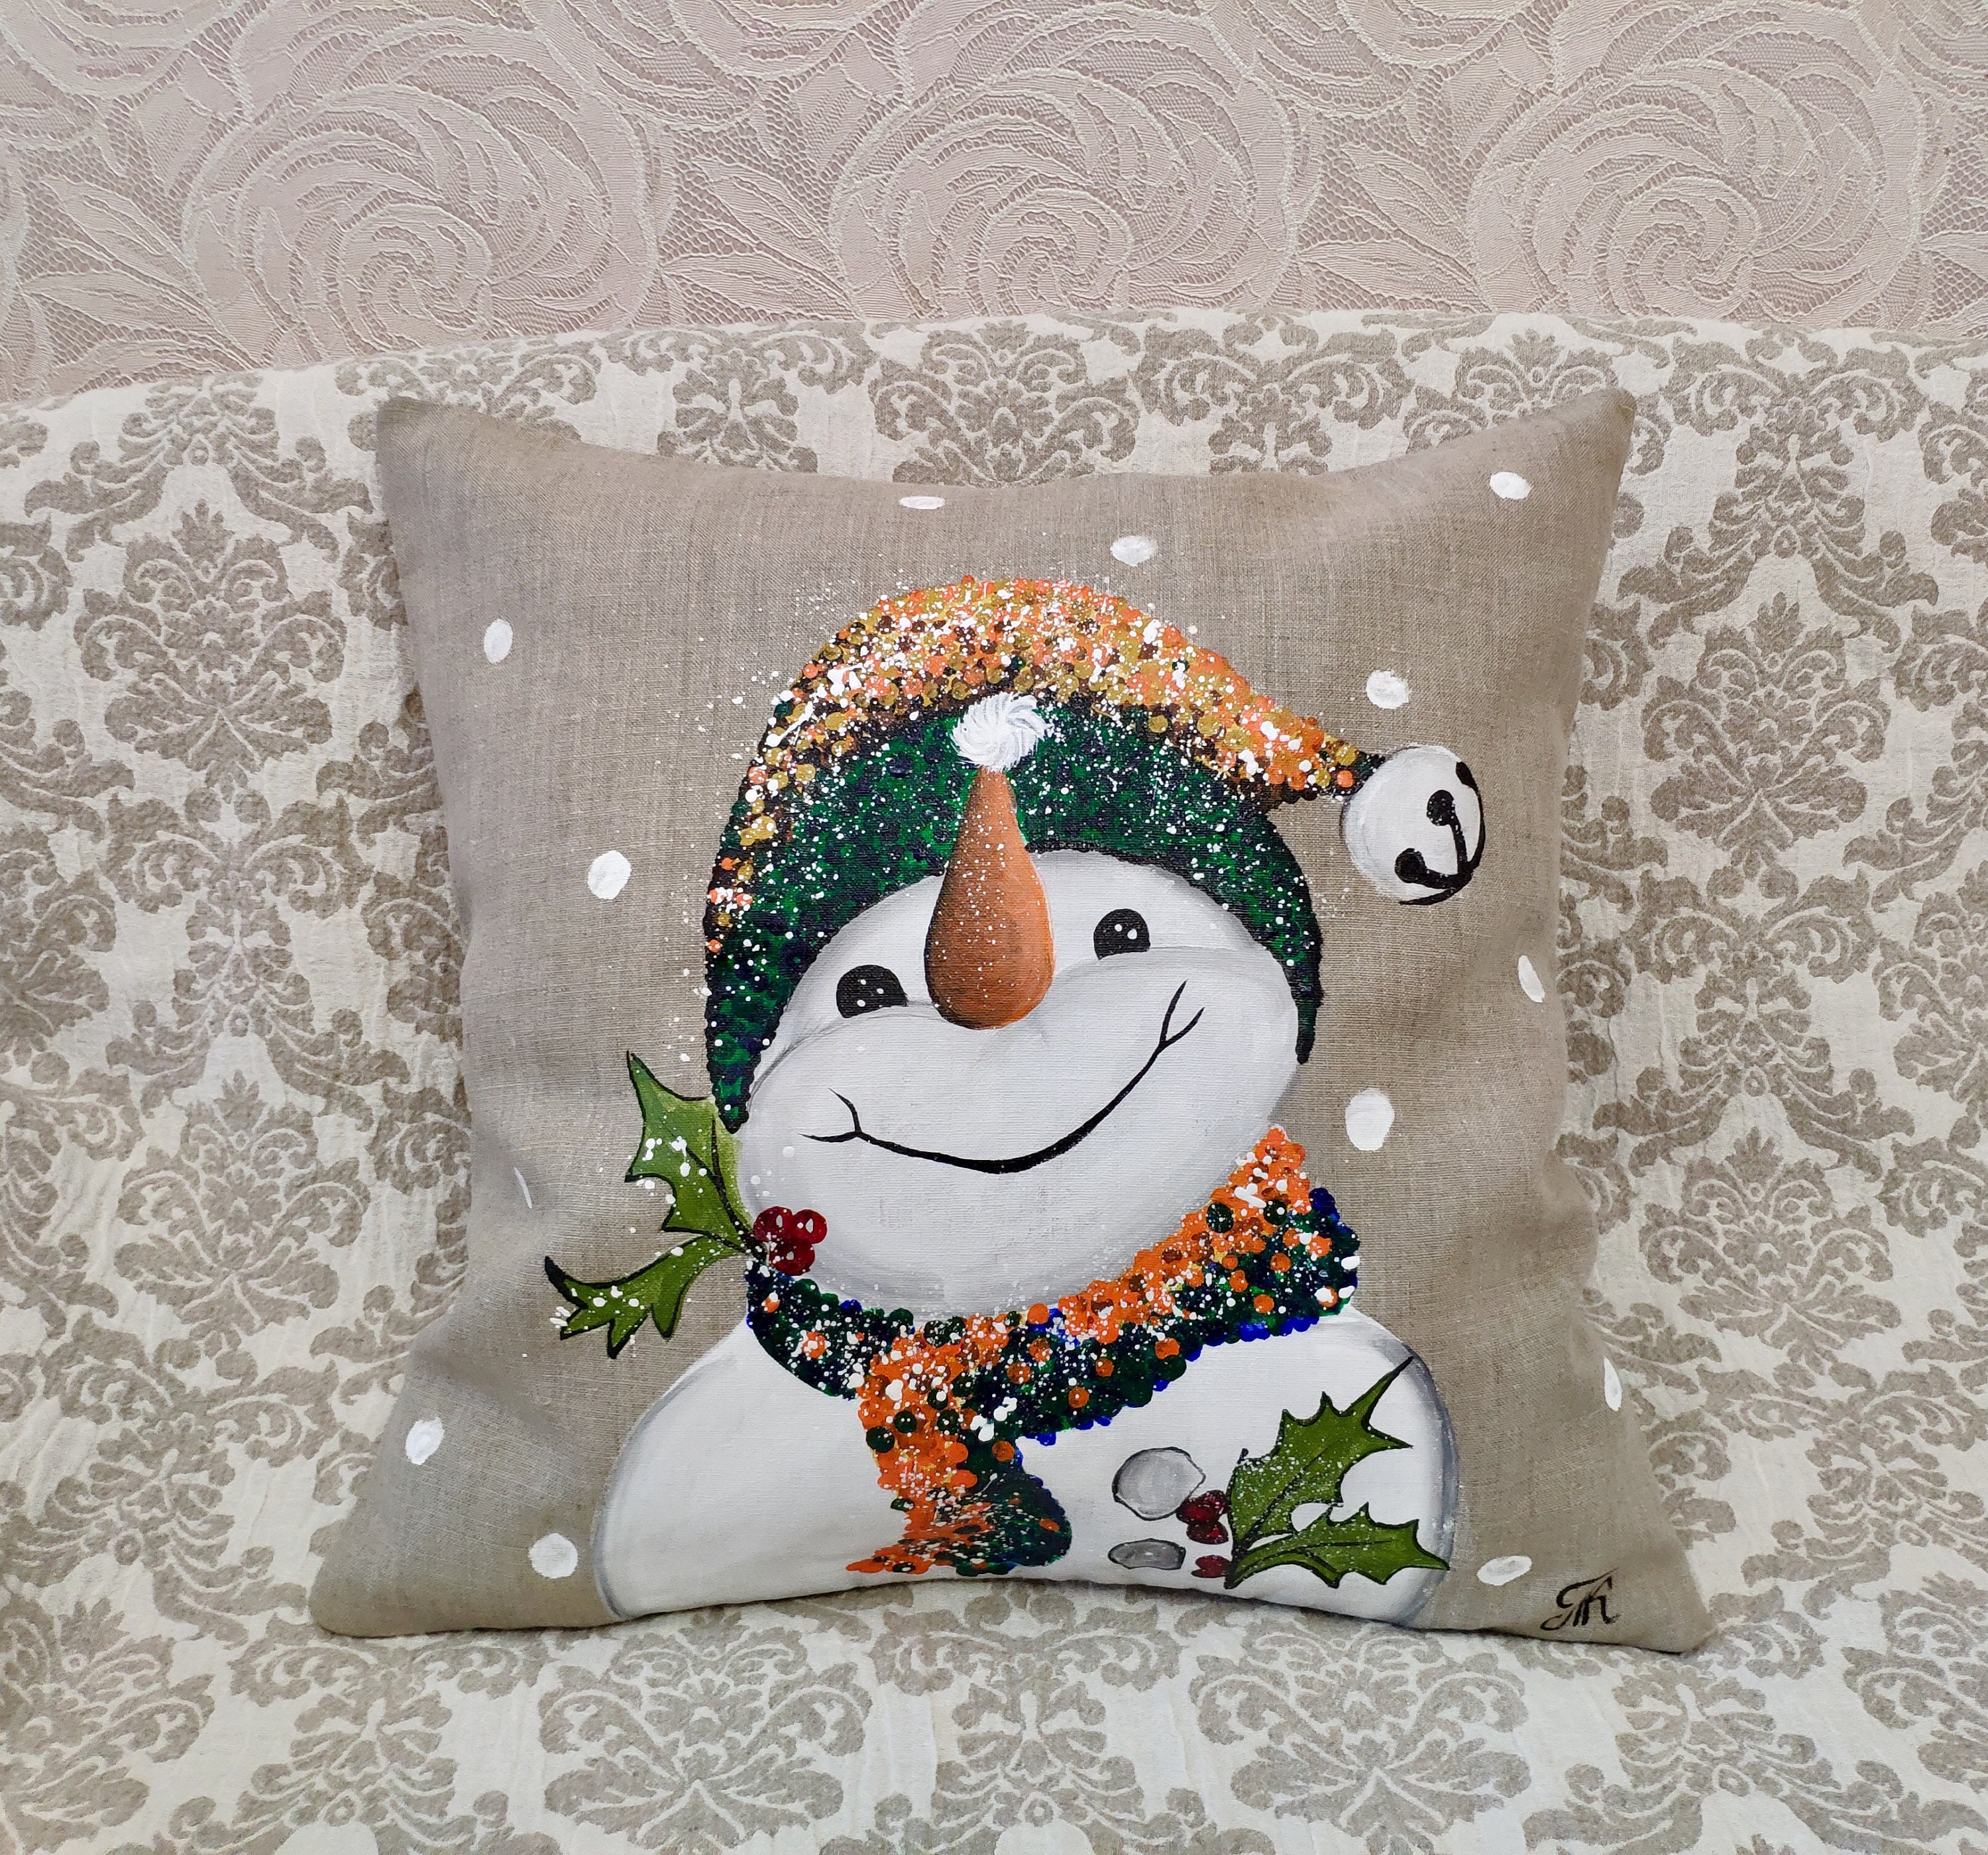 Snowman Pillow Cover Christmas Decorations Vintage | Etsy